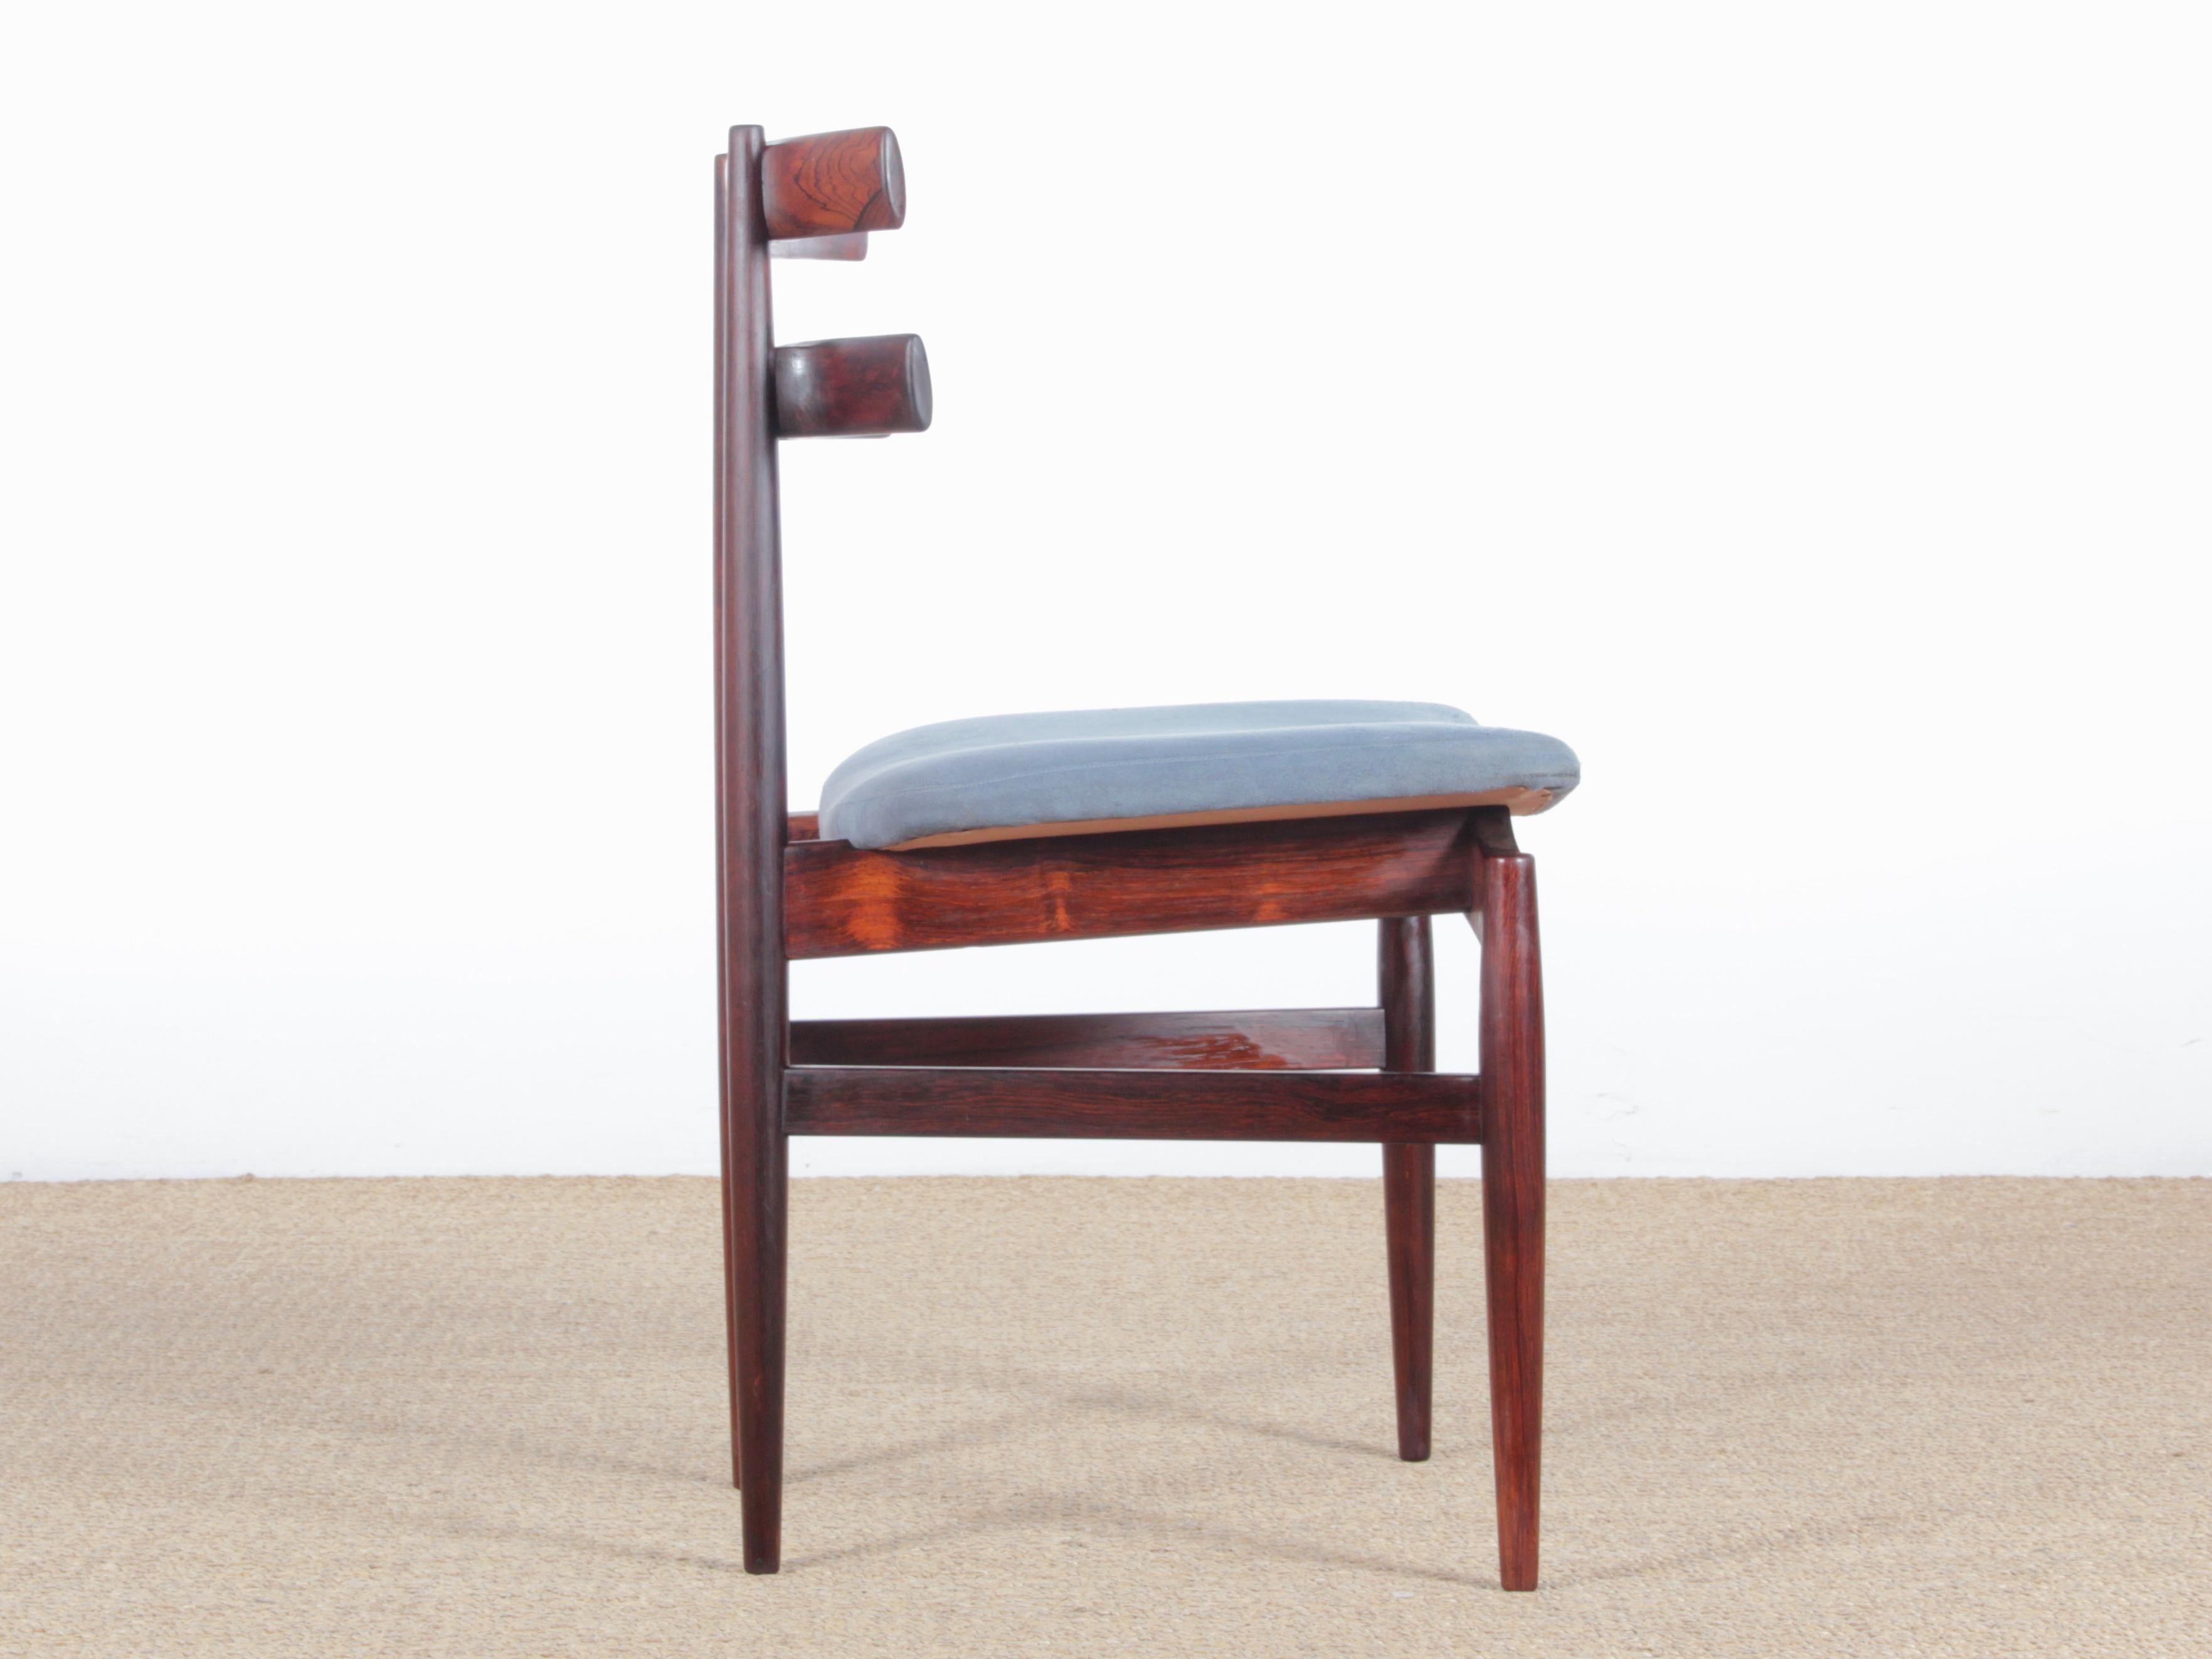 Teak Mid-Century Modern Danish Set of Six Chairs in Rosewood by Poul Hundevad For Sale